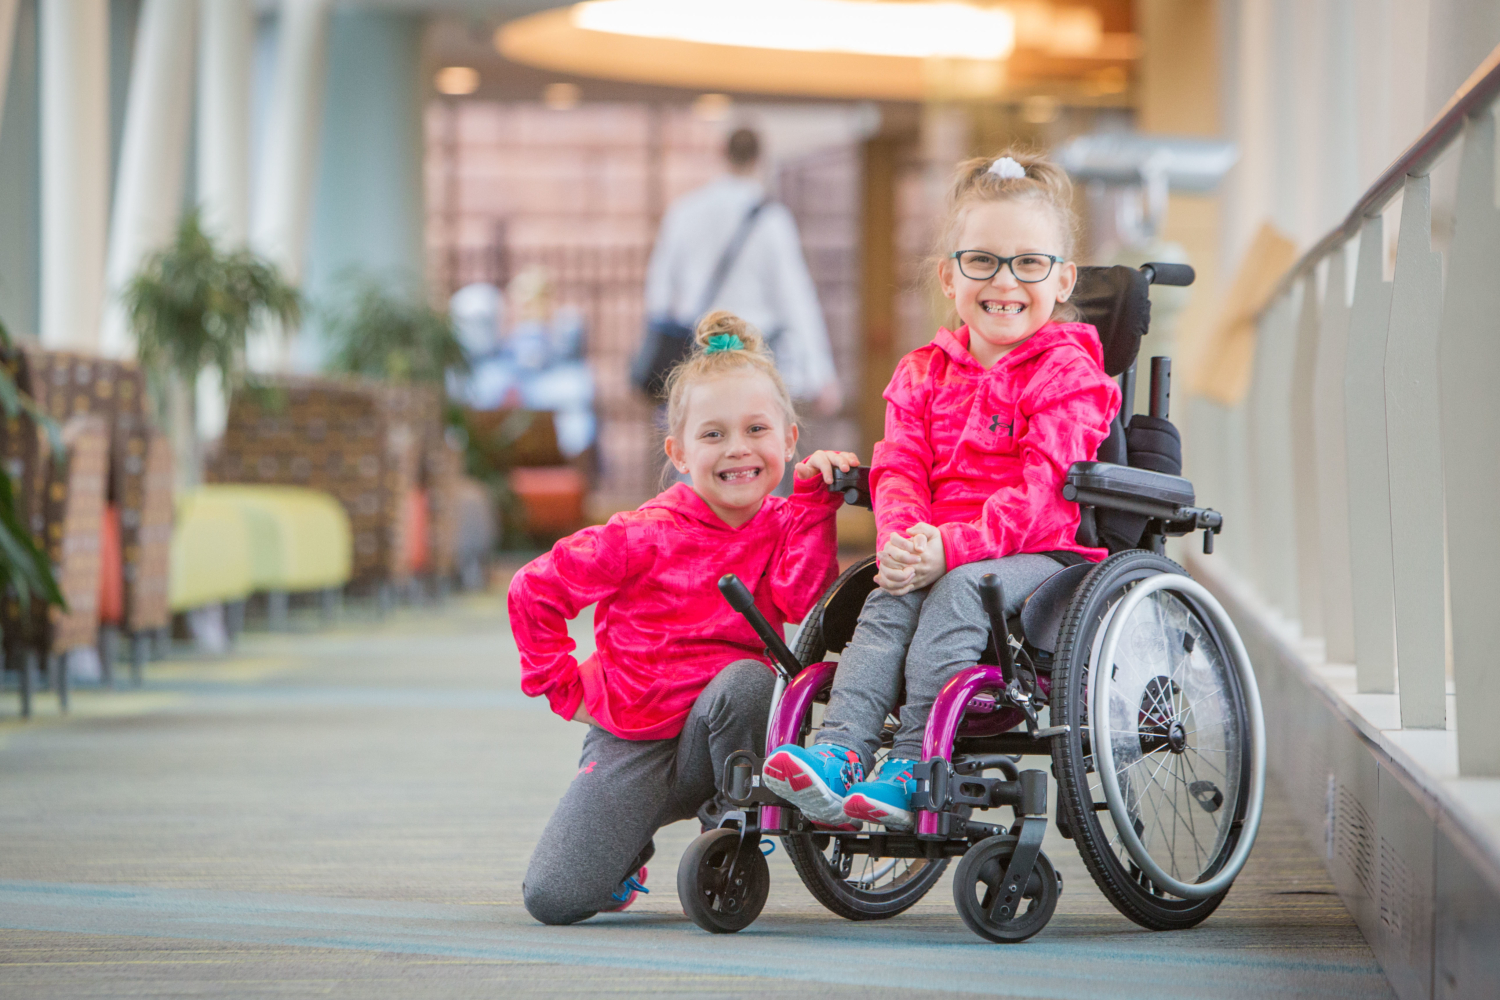 Kaidyn, who receives care for cerebral palsy, and her twin sister Keatyn.